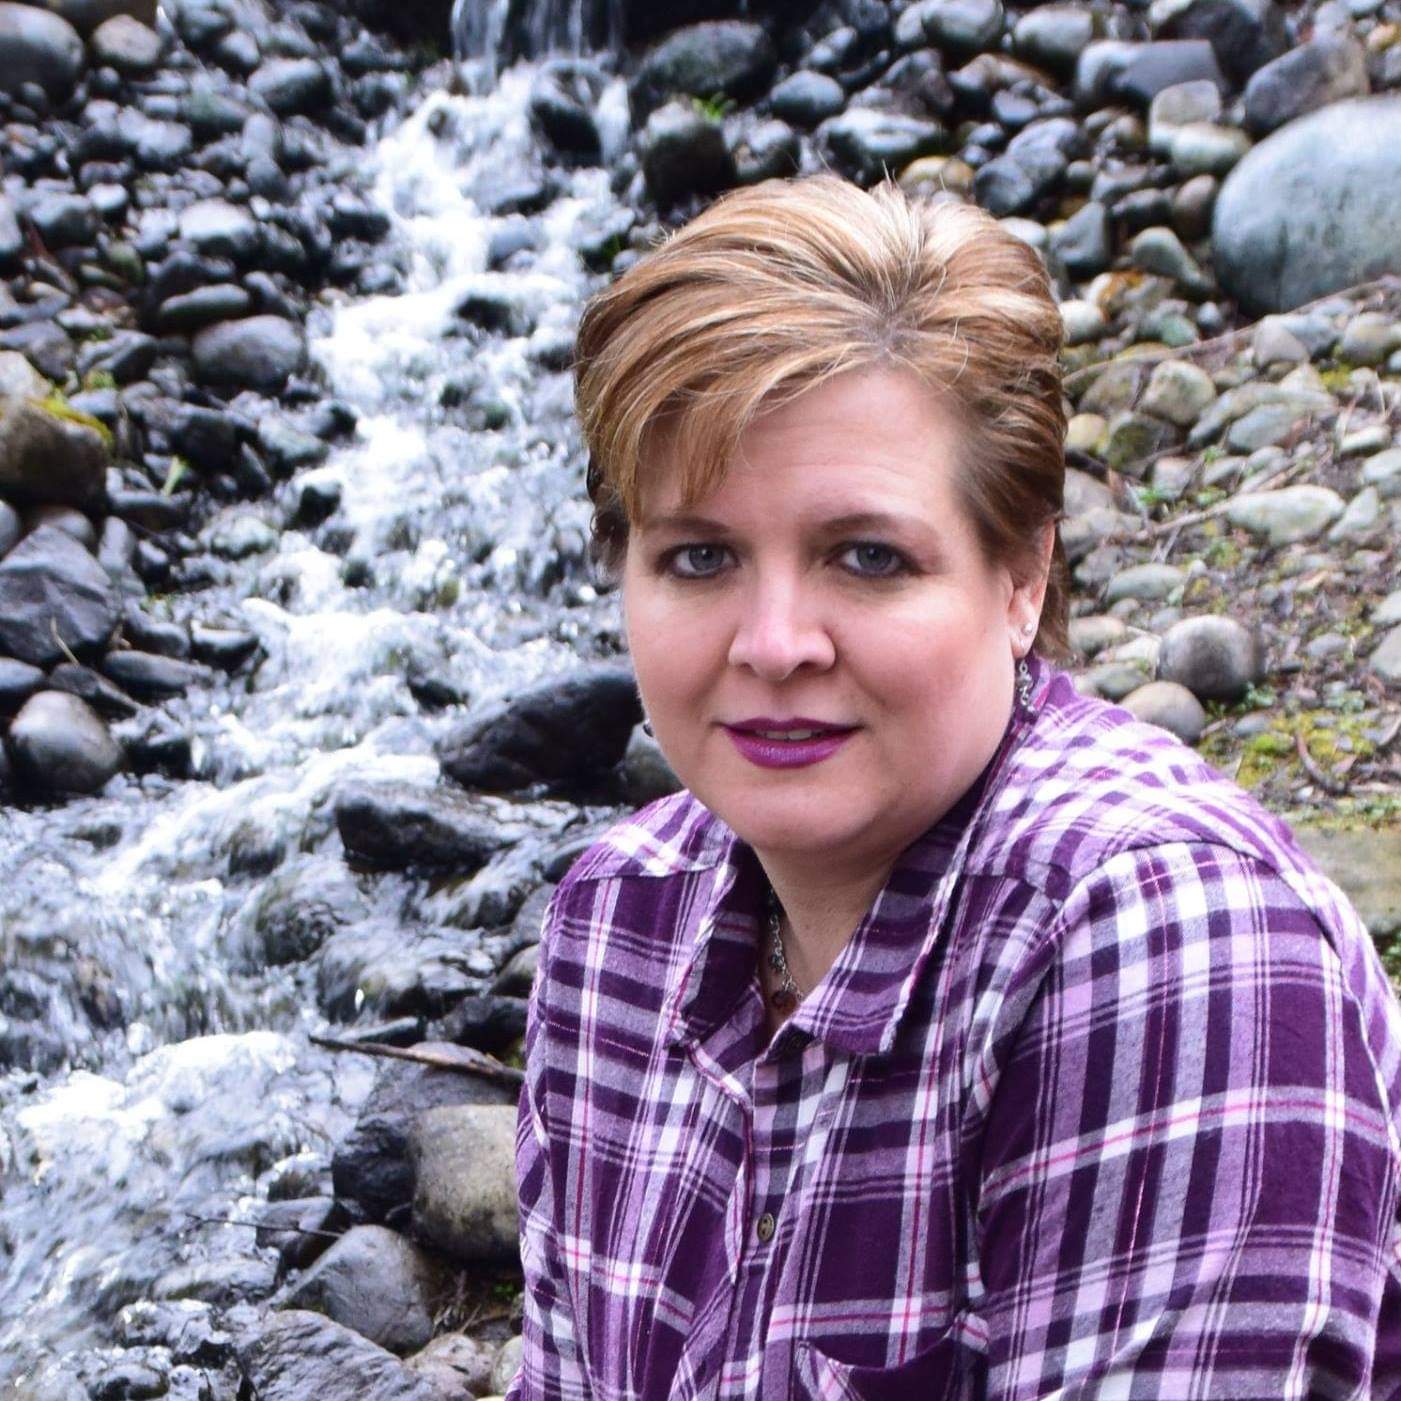 Carli, white woman with short blonde and brown hair, wearing a purple and white flannel button up top with a stream and rocks behind her